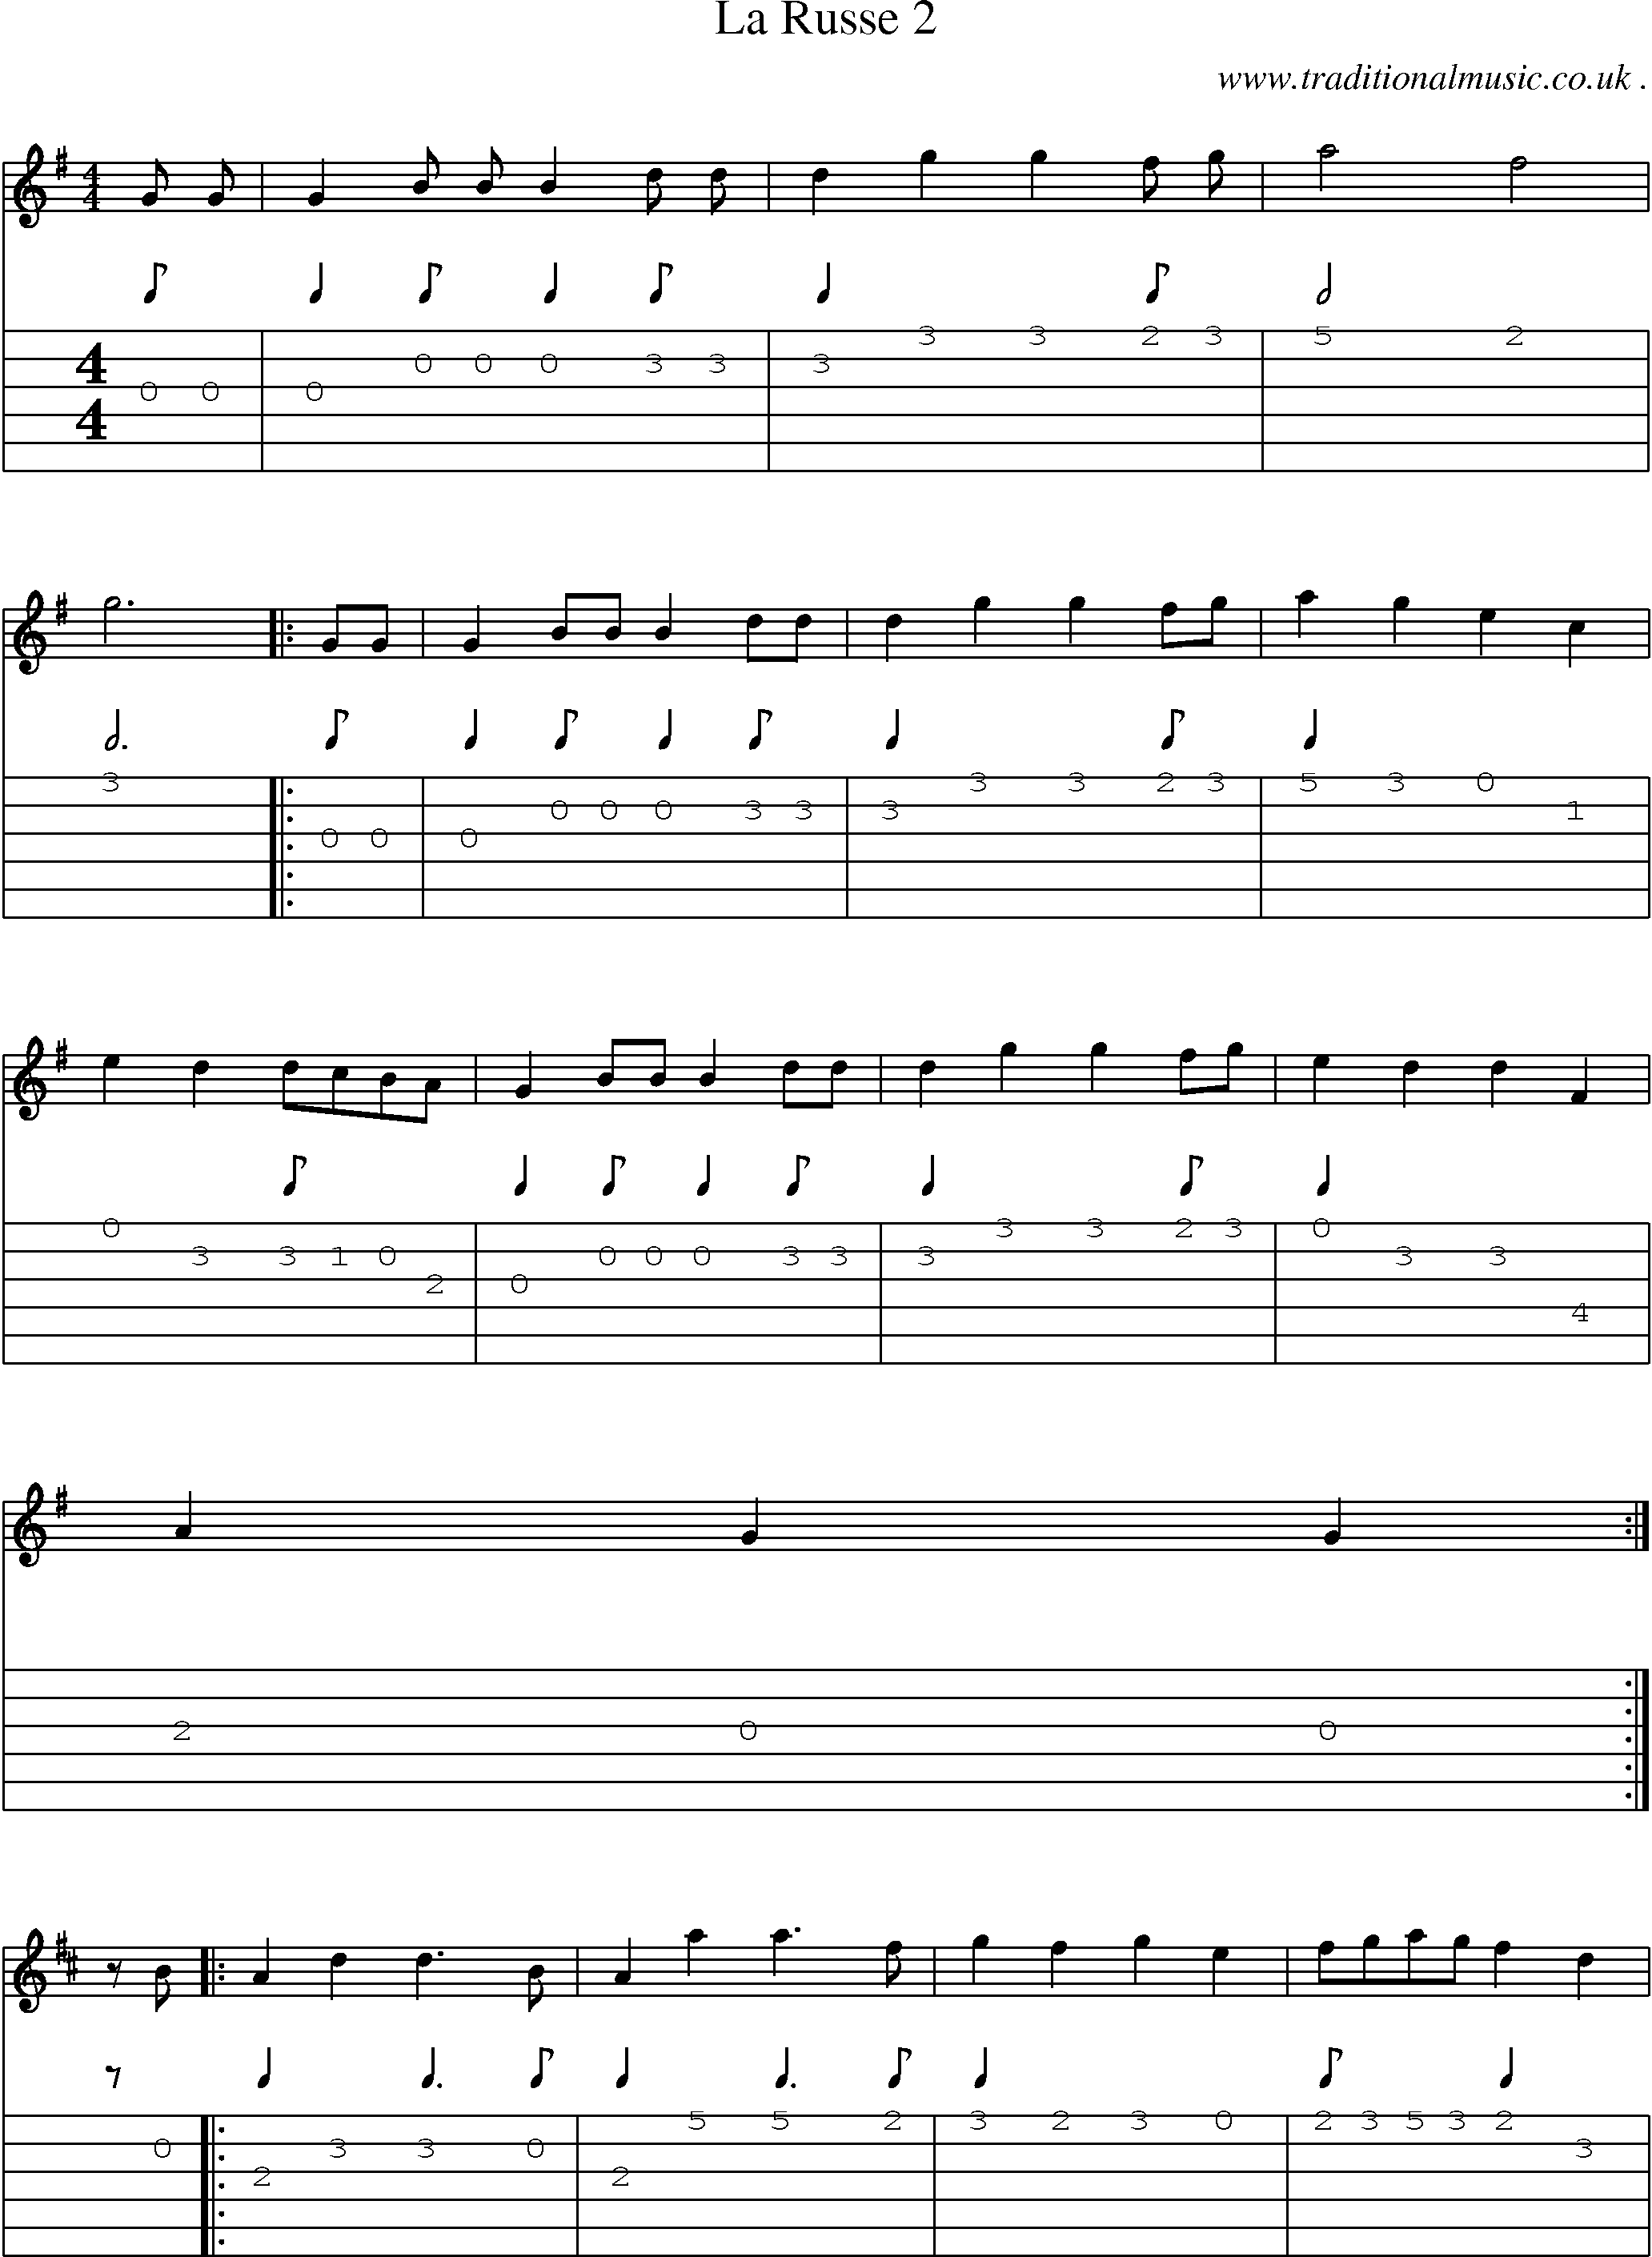 Sheet-Music and Guitar Tabs for La Russe 2